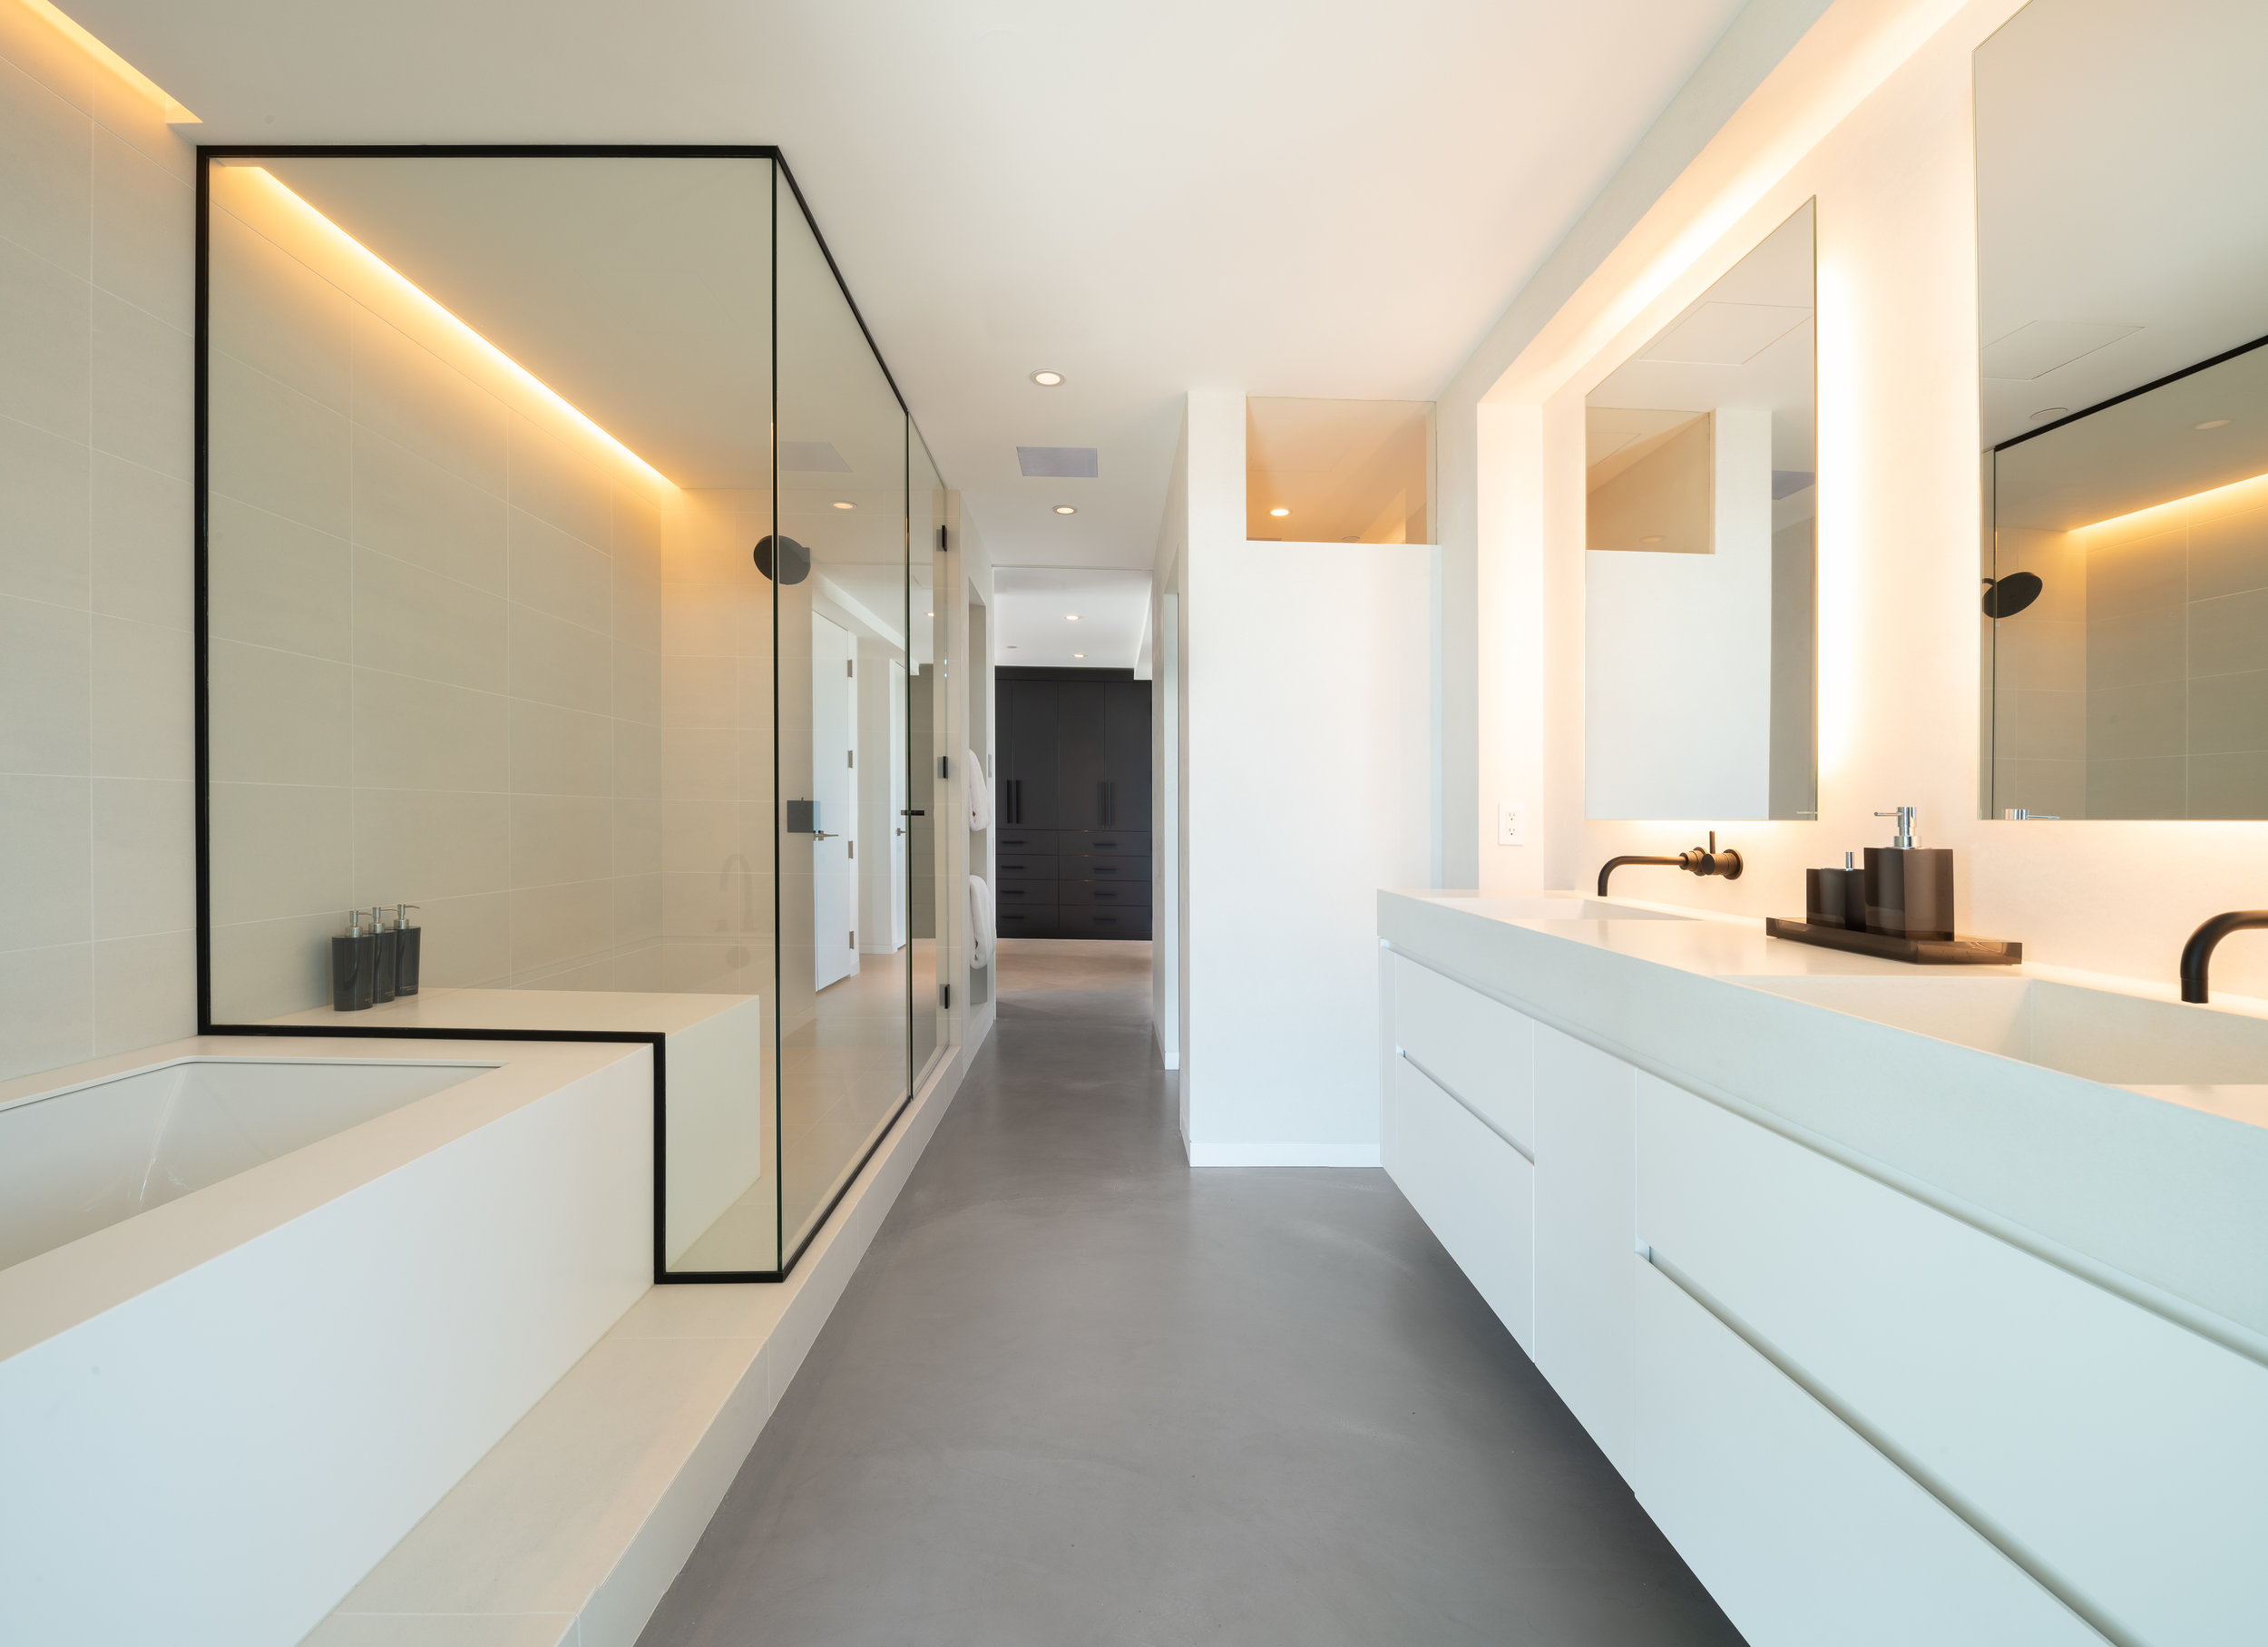 Modern white bathroom with walk-in shower and light cove detail